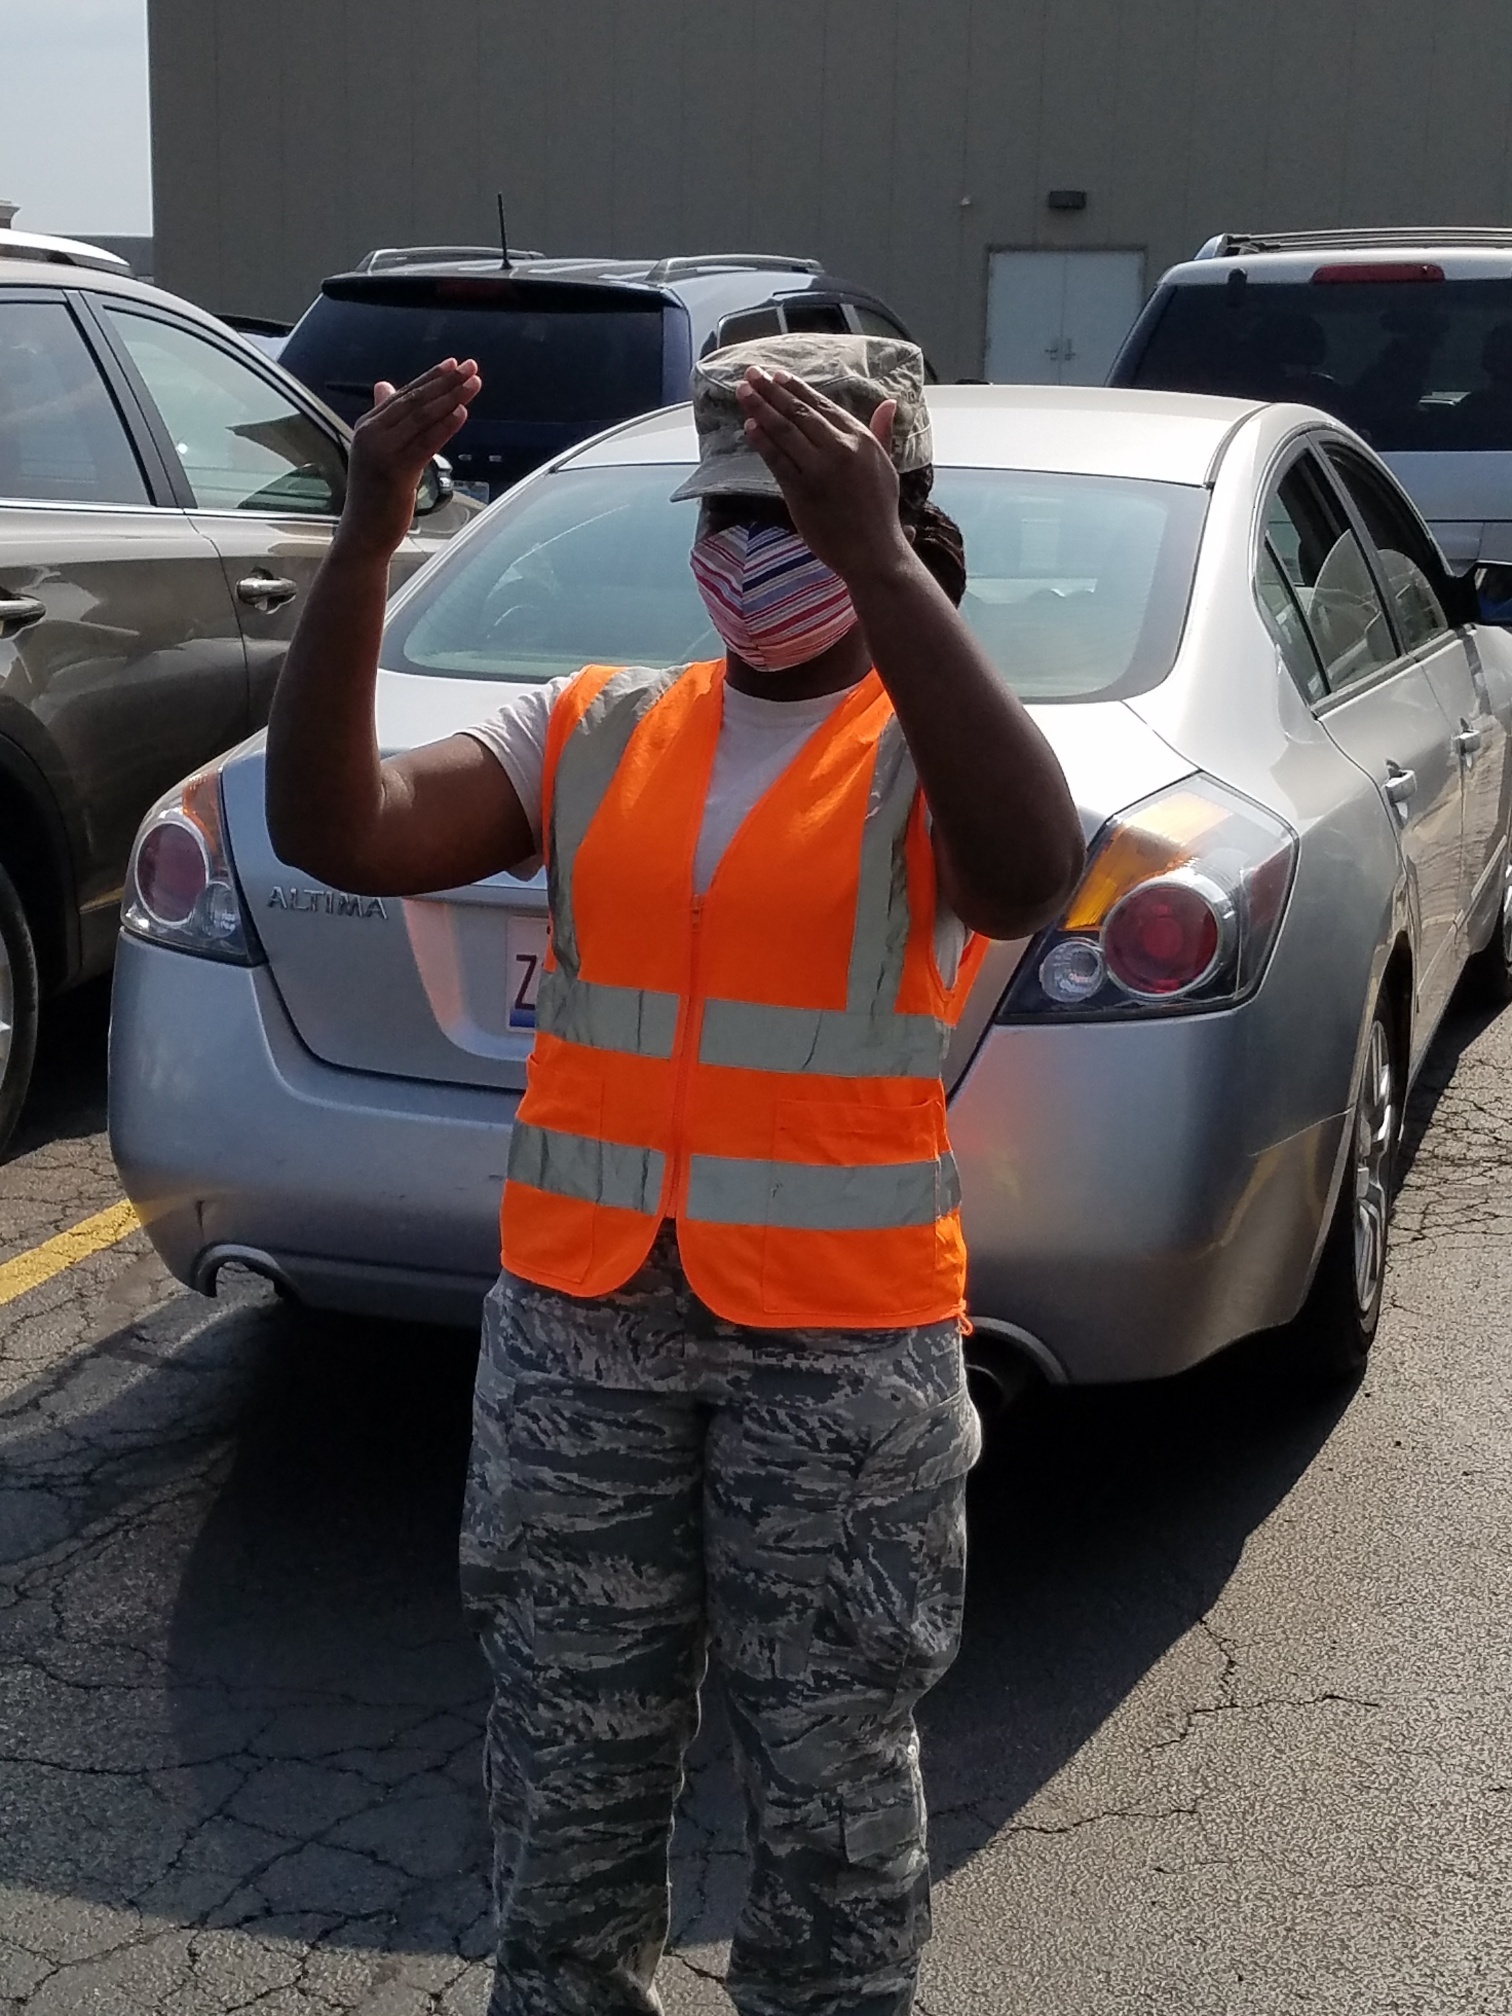 C/1st Lt. Lyonsford assisting with traffic management. Photo credit: Lt Col Gary Gross, Col Shorty Powers Composite Squadron